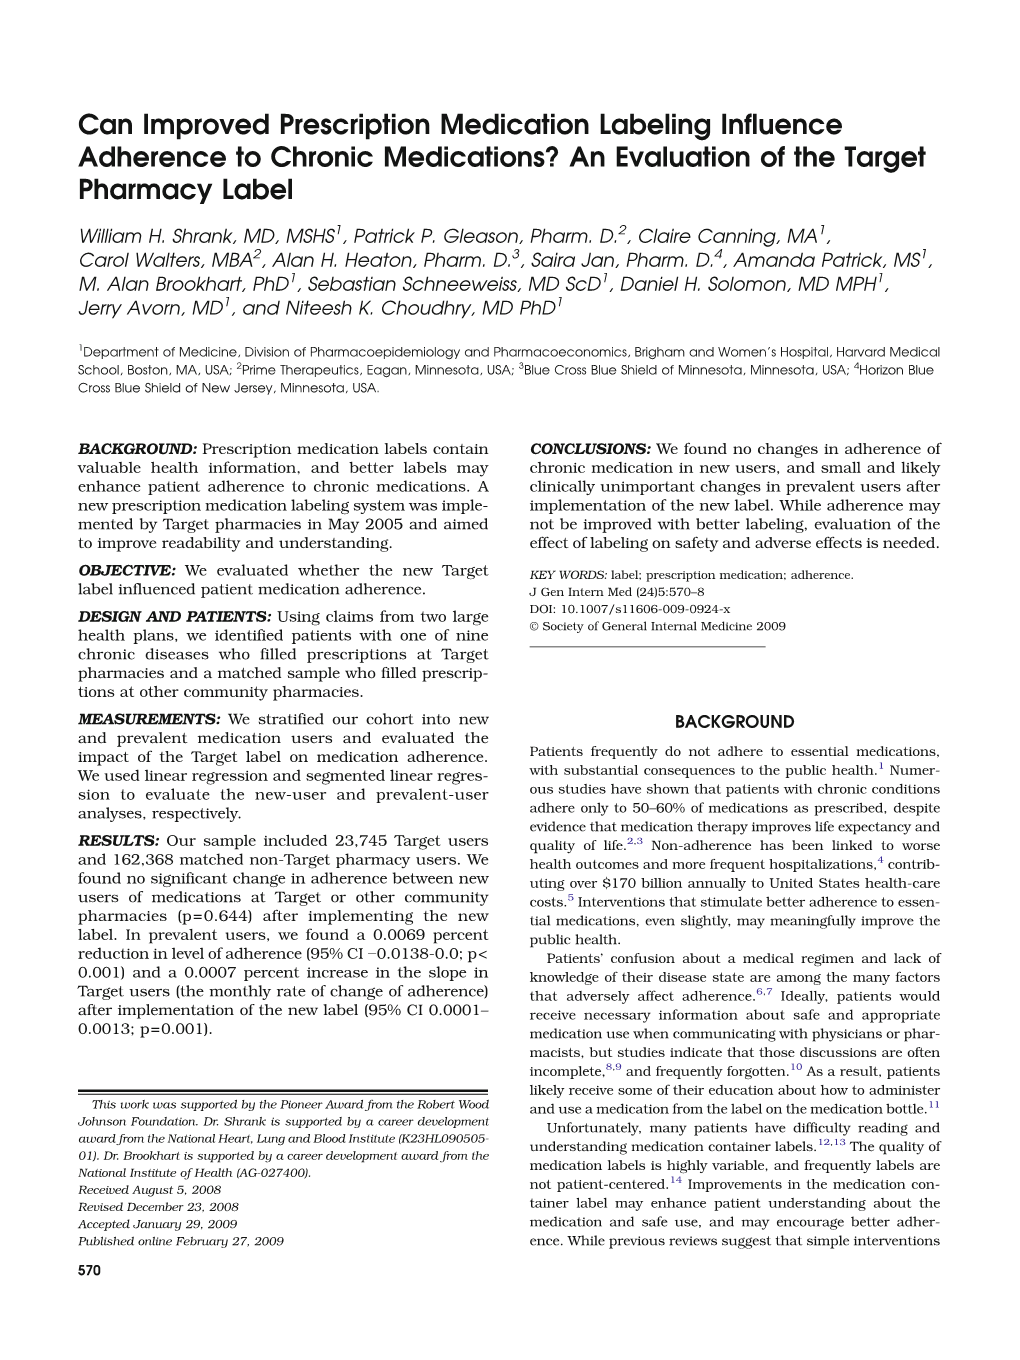 Can Improved Prescription Medication Labeling Influence Adherence to Chronic Medications? an Evaluation of the Target Pharmacy Label